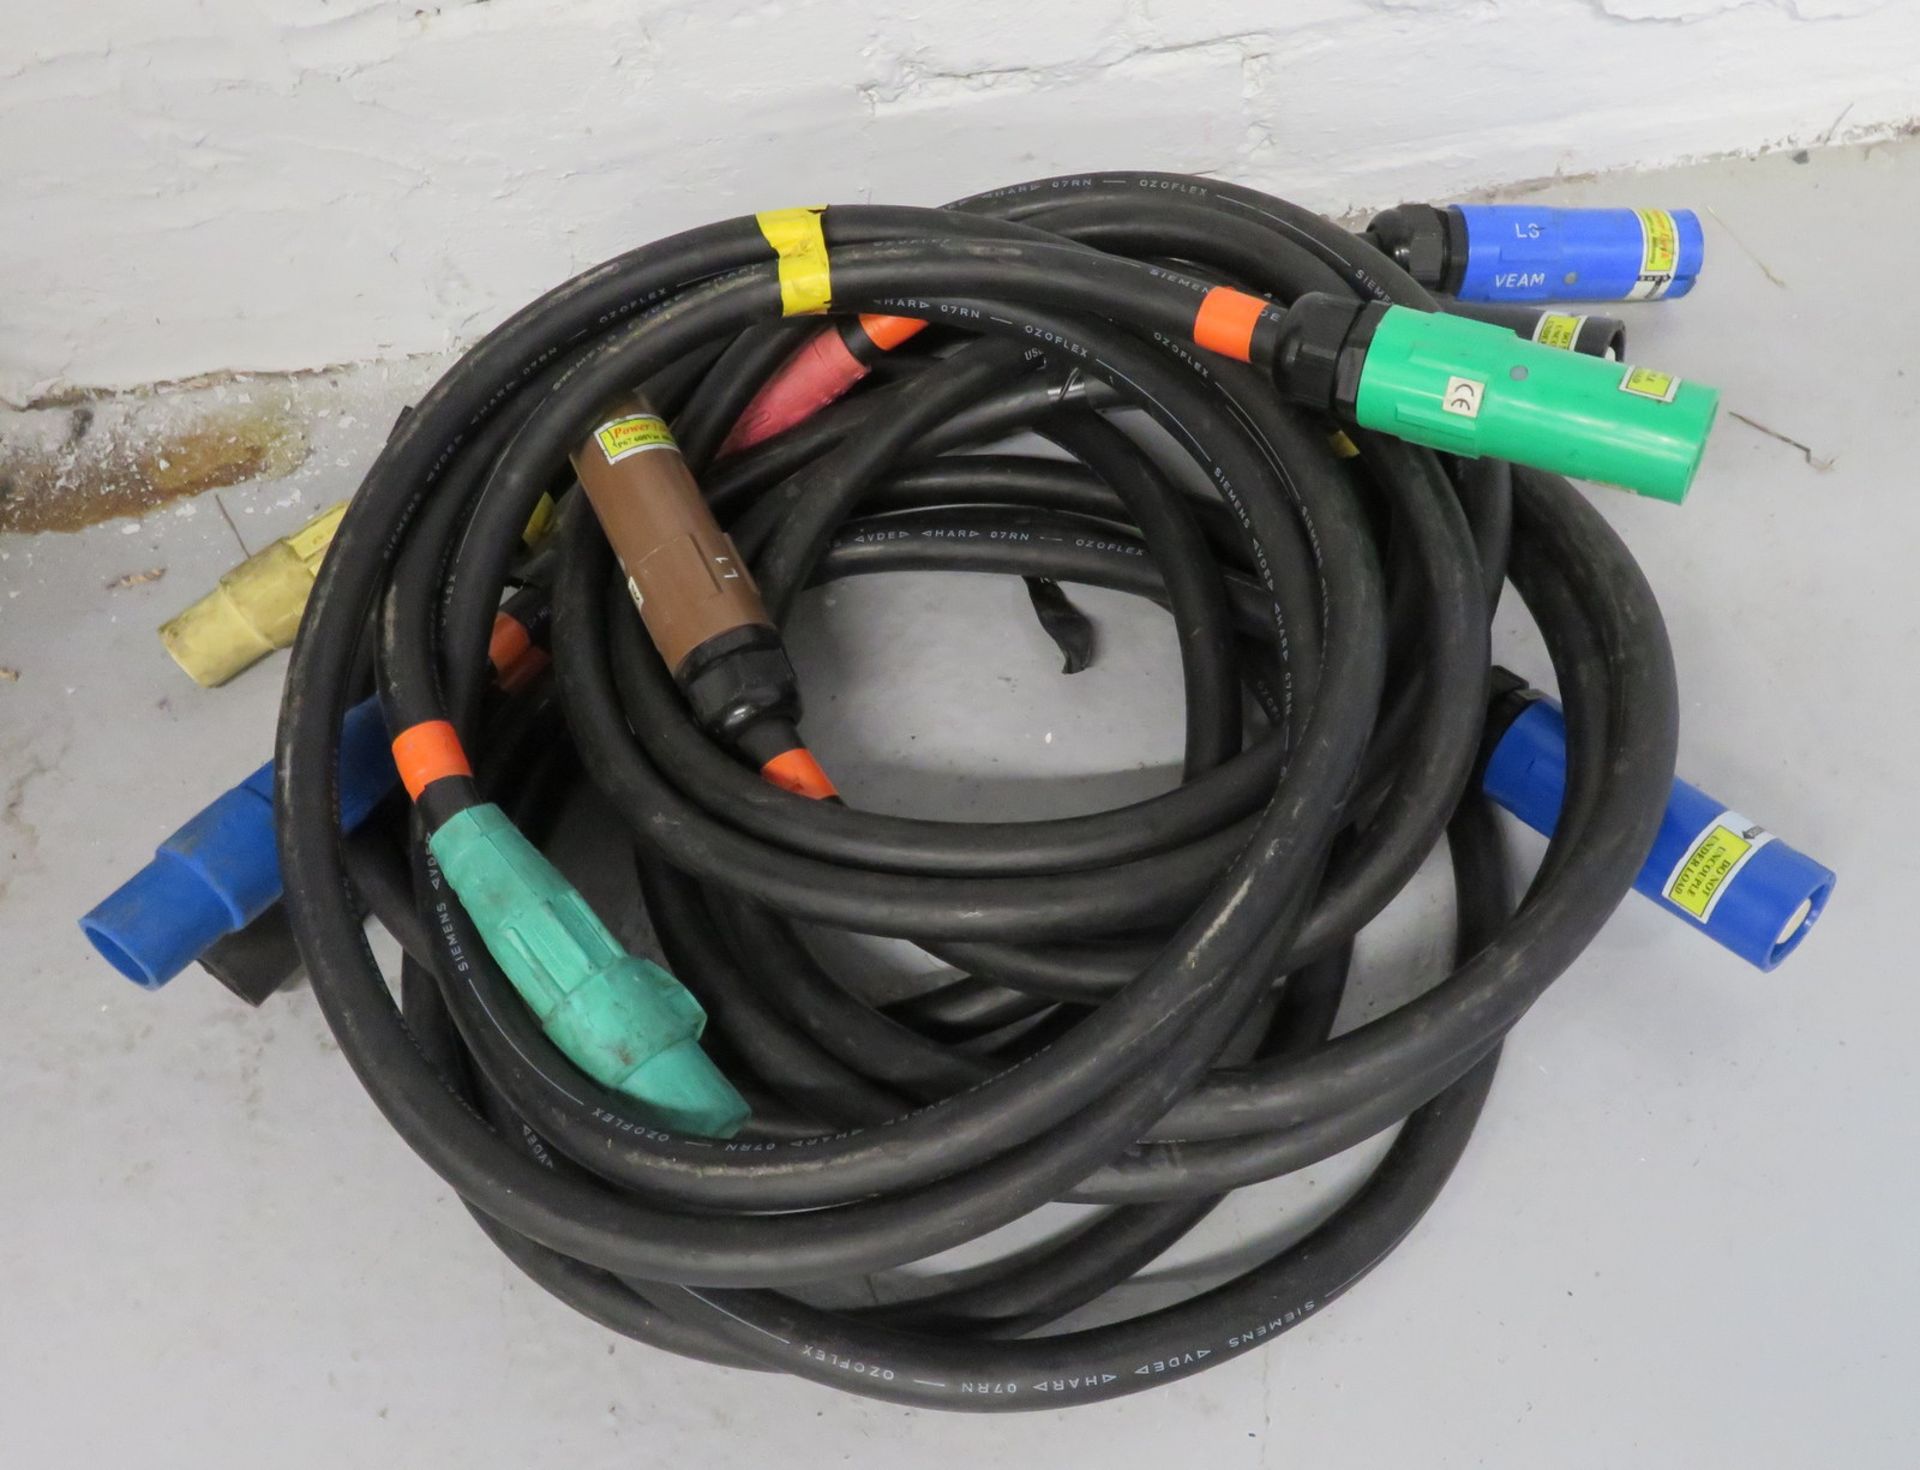 Set of Powerlock to Camlock cables 3m lengths.